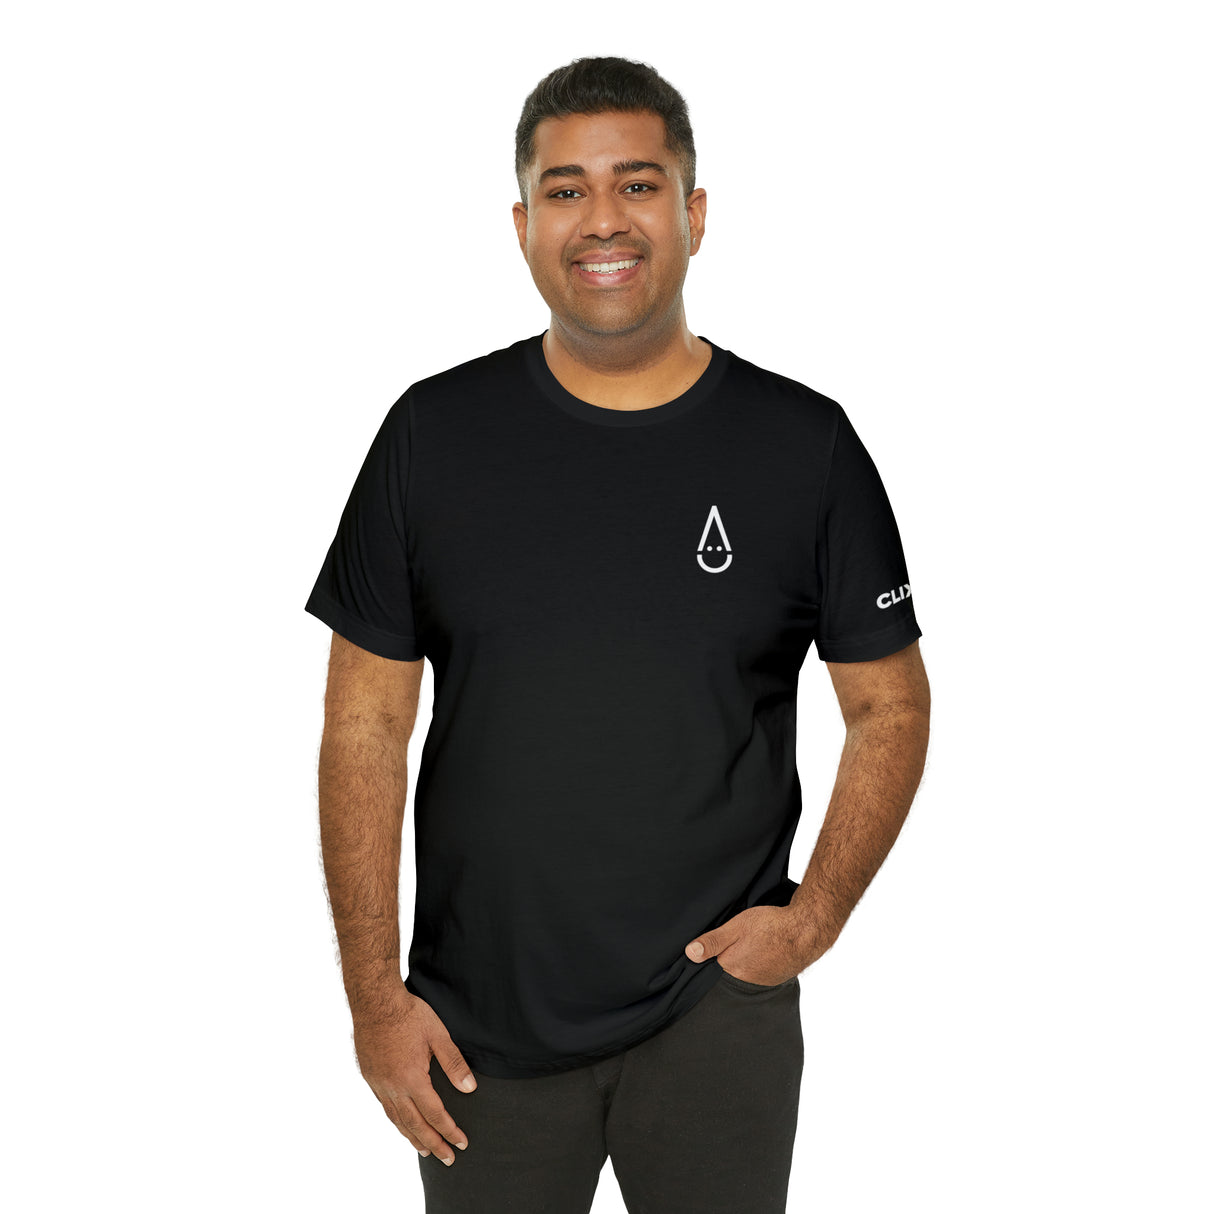 Smiling Is My Favorite Unisex Tee - ClixAuto